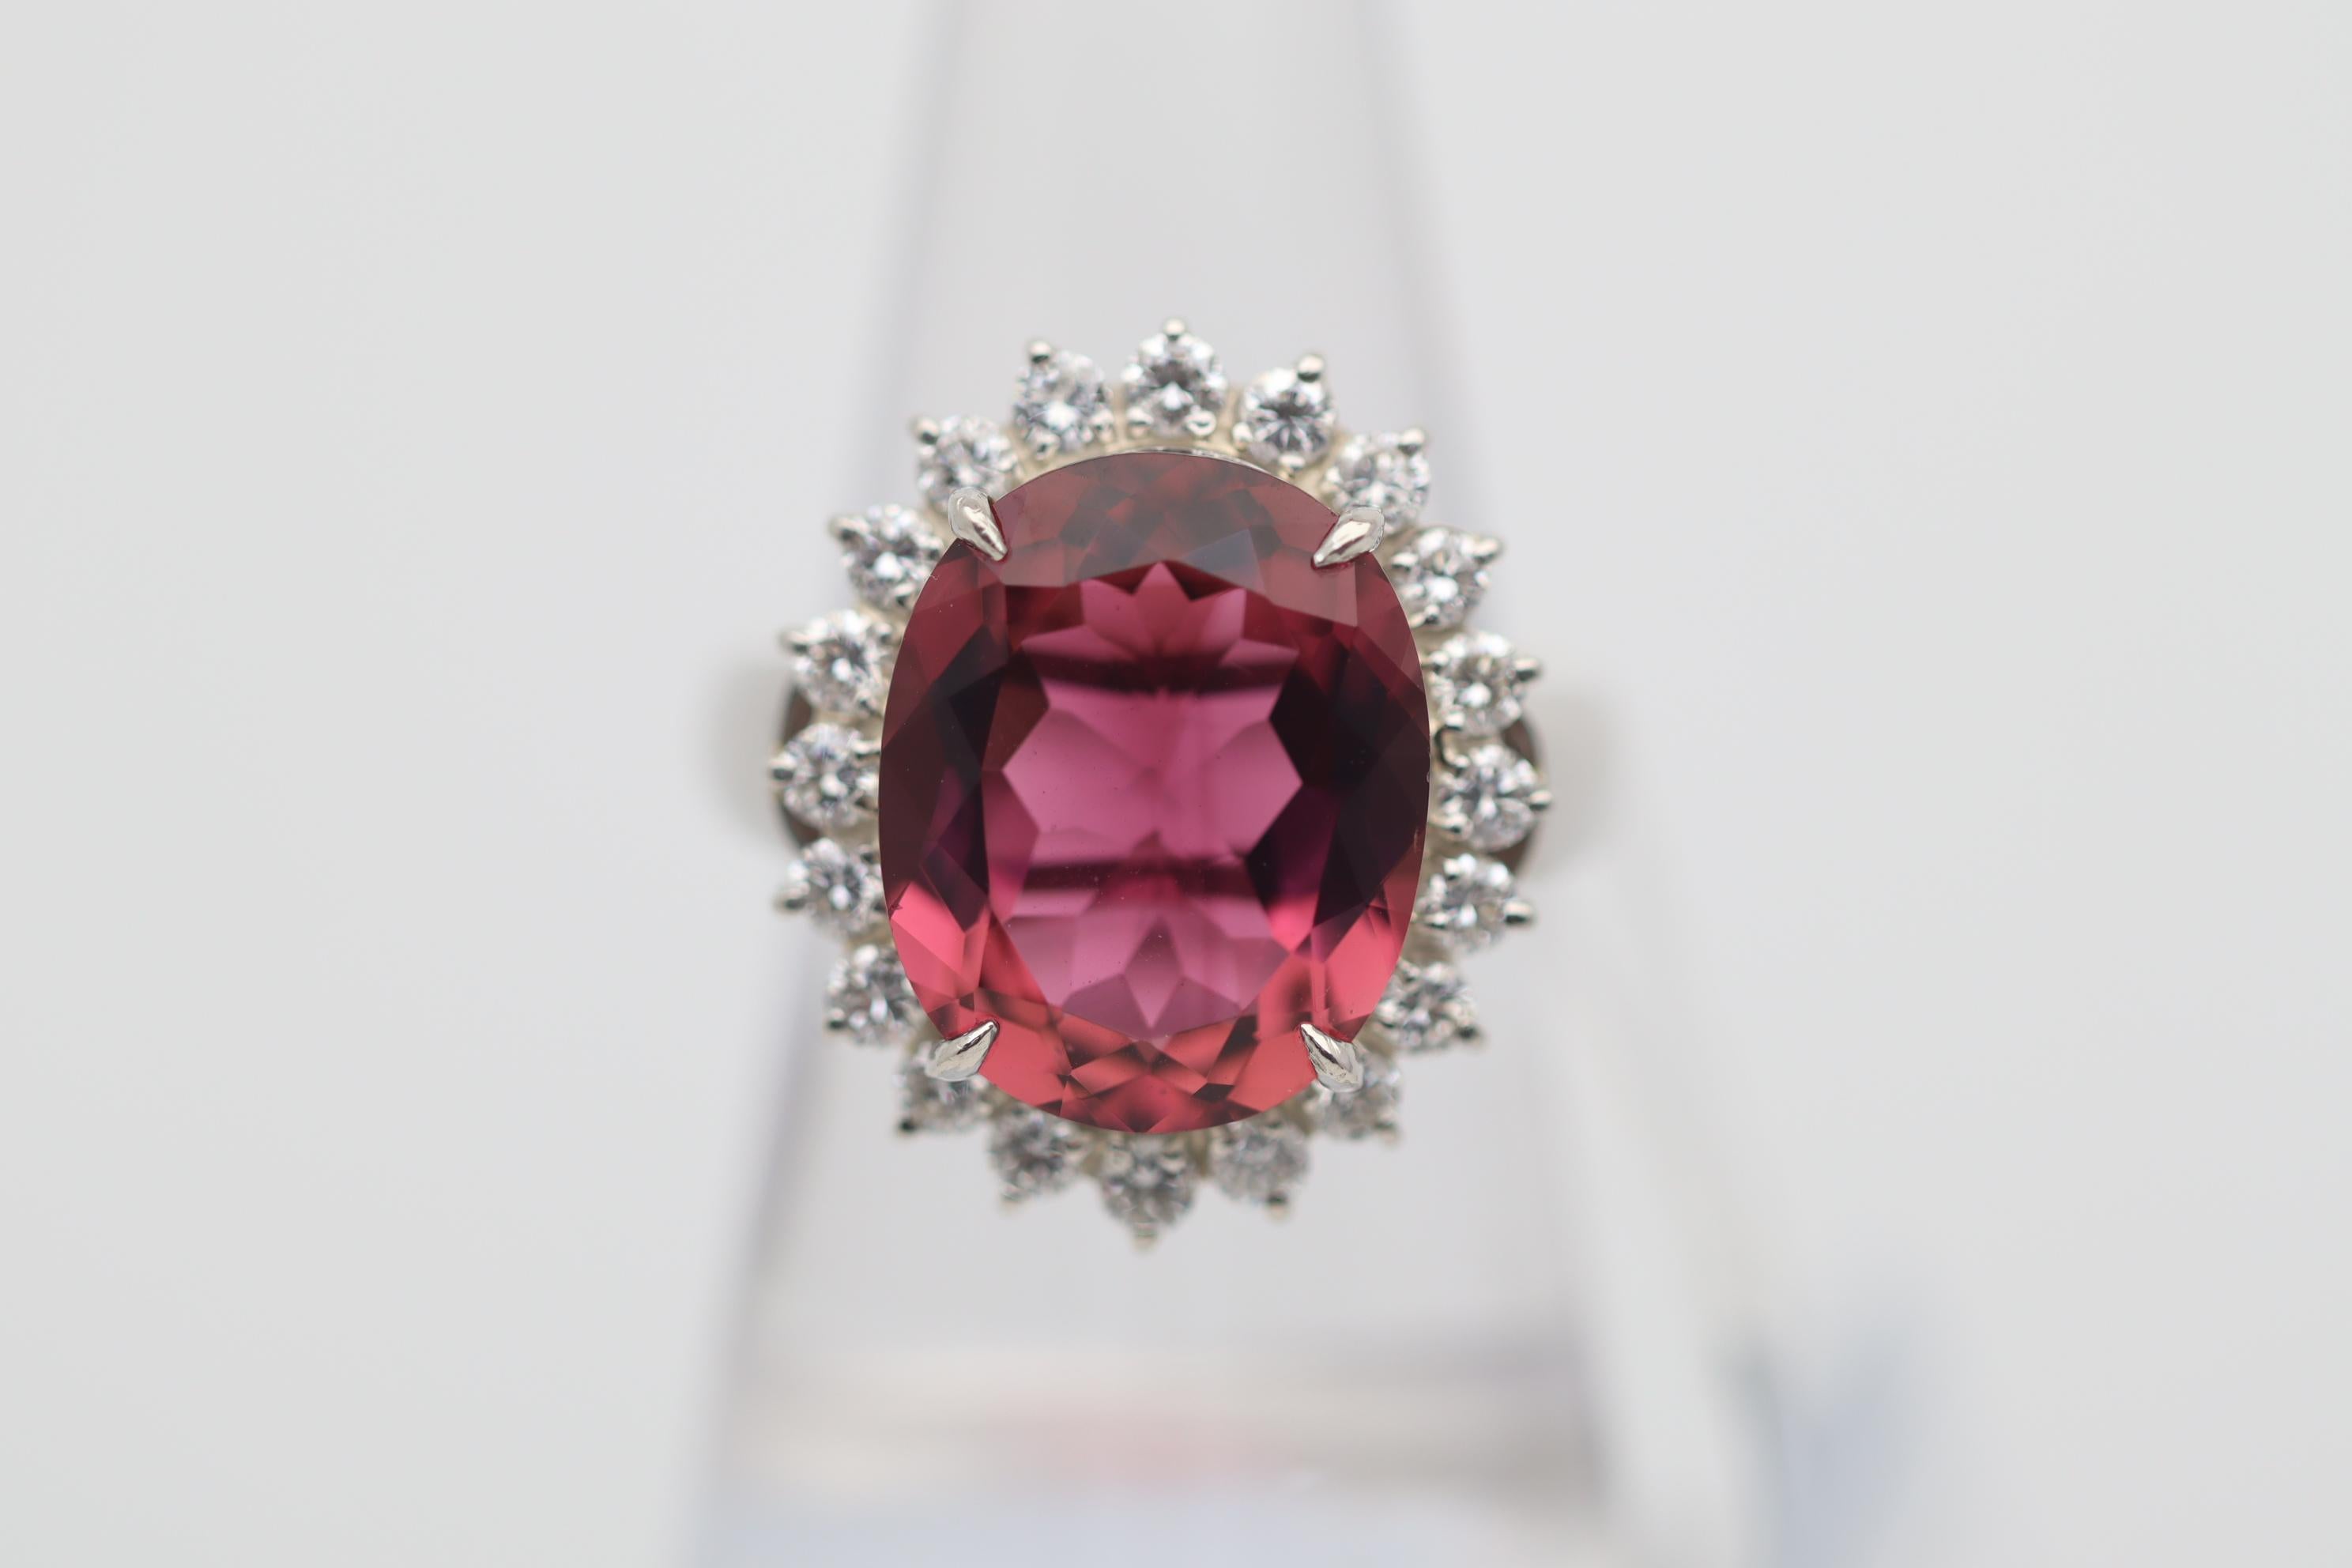 Simply superb! This large tourmaline weighs an impressive 9.11 carats and has the most pleasing and vibrant pink color. Adding to that, the stone is completely clean with no visible inclusions allowing the stones natural color and brightness to